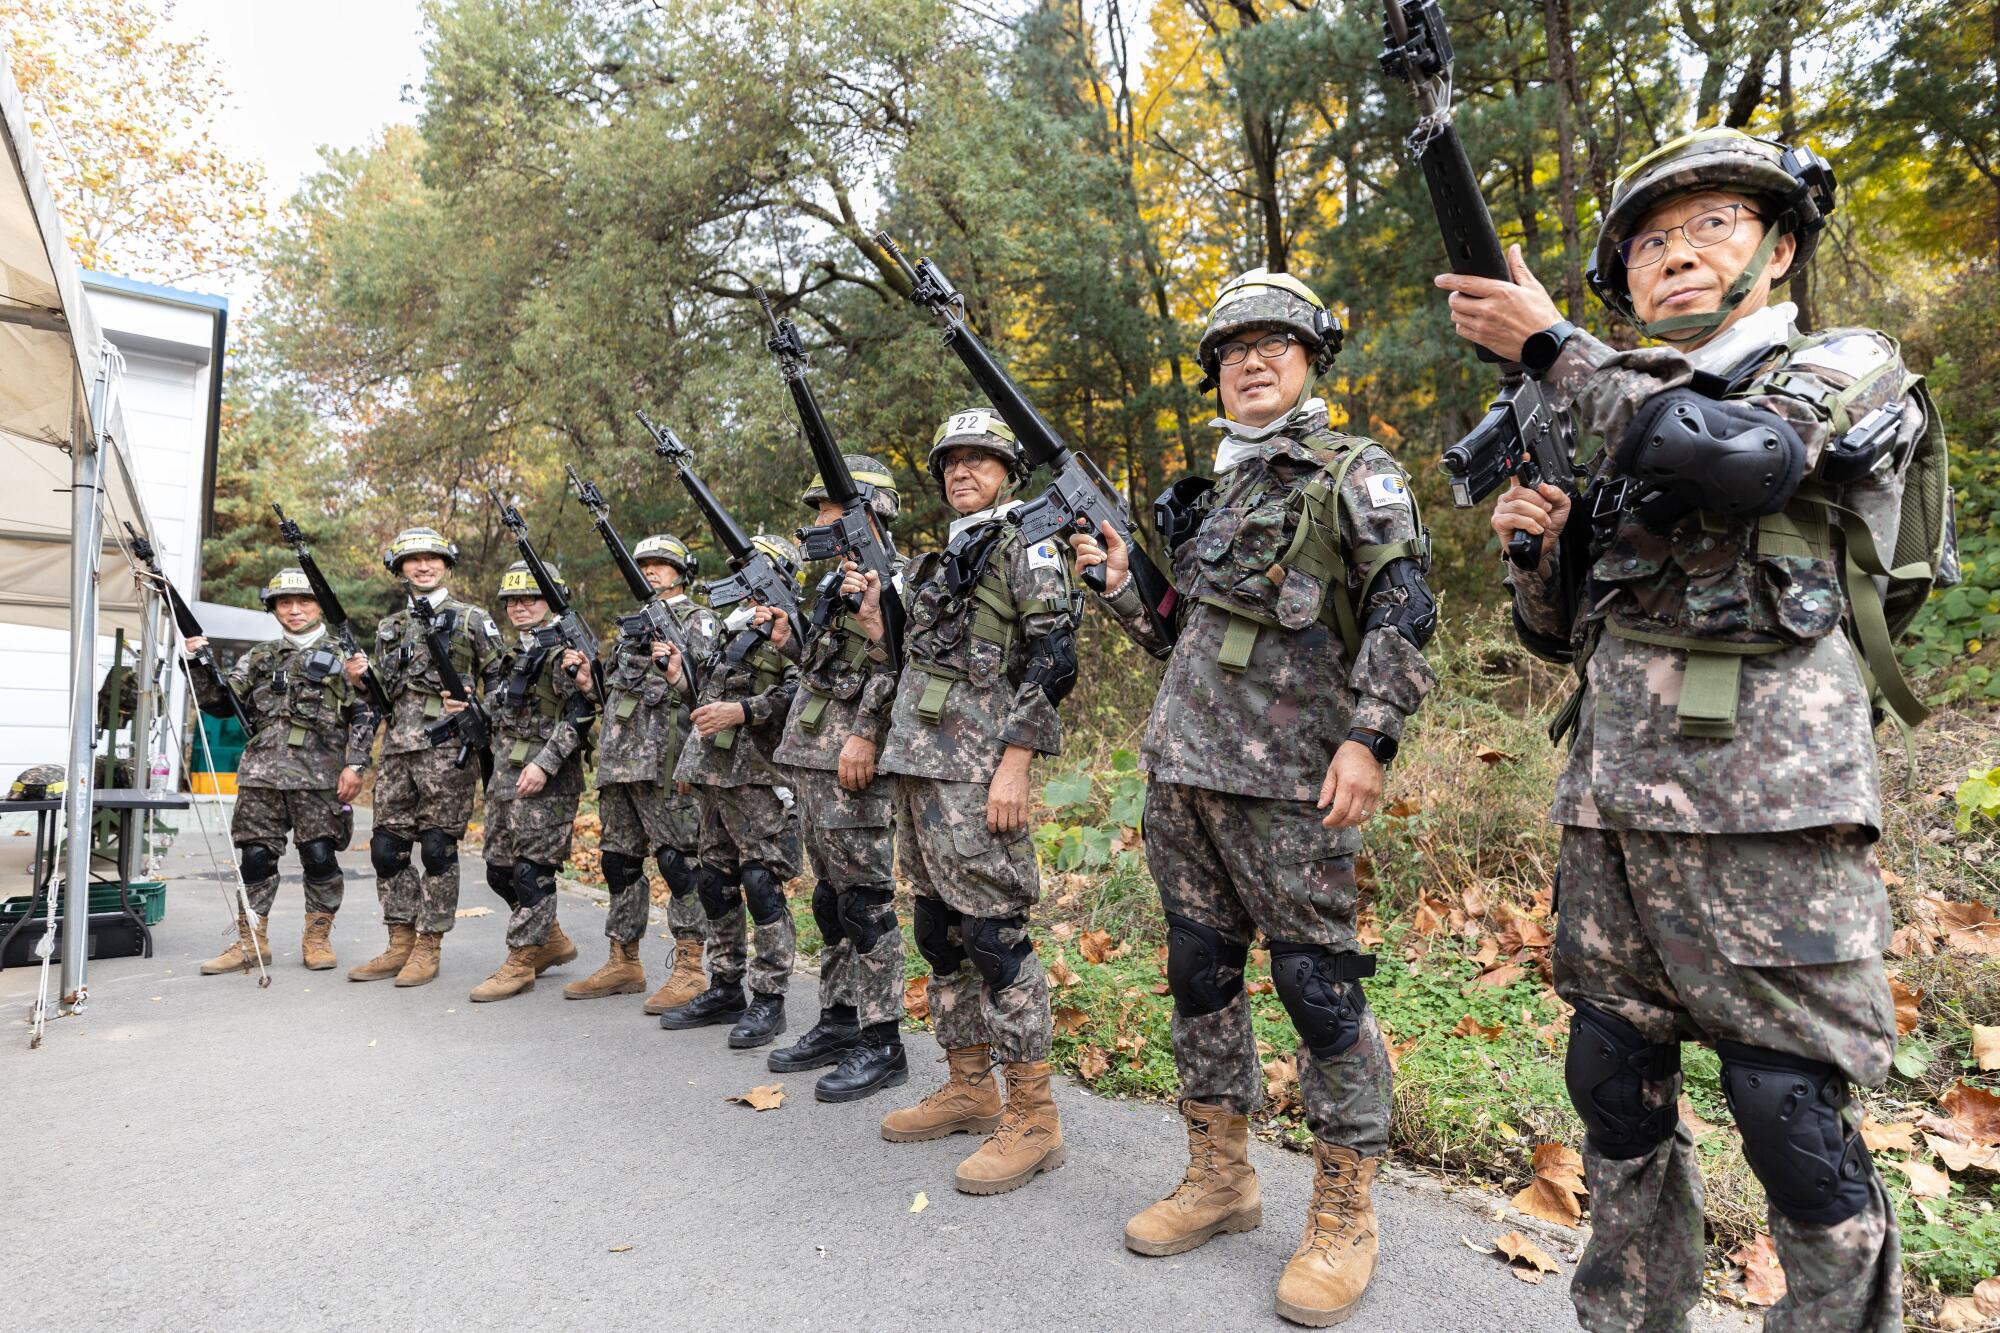 Members of the Senior Army line up with guns during military training